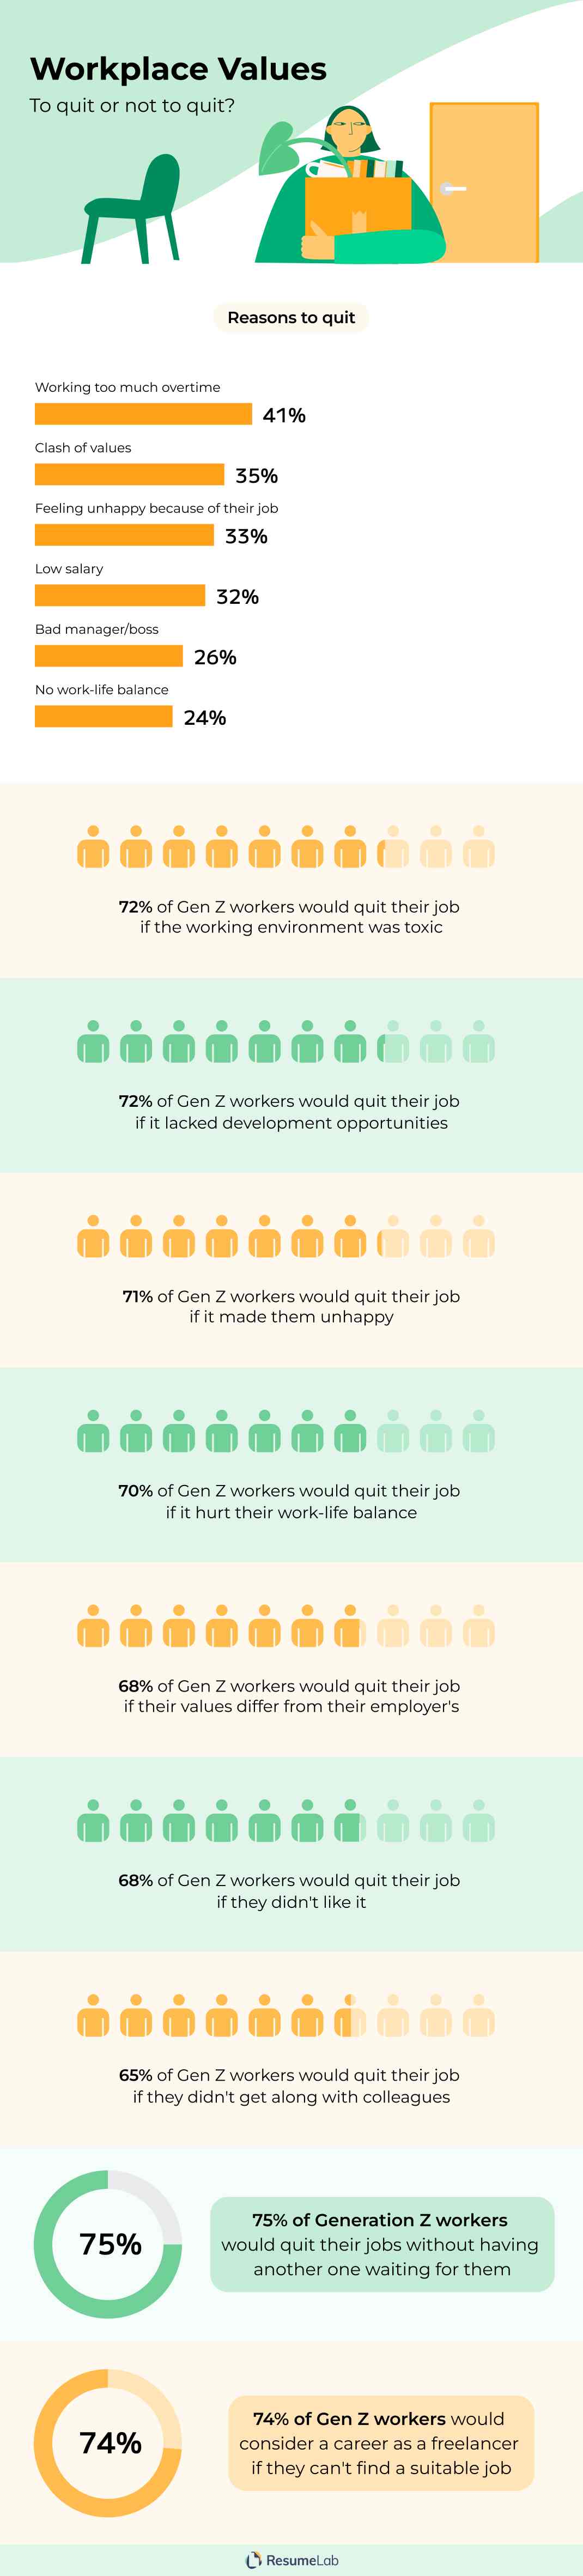 gen z reasons behind the decision to quit the job